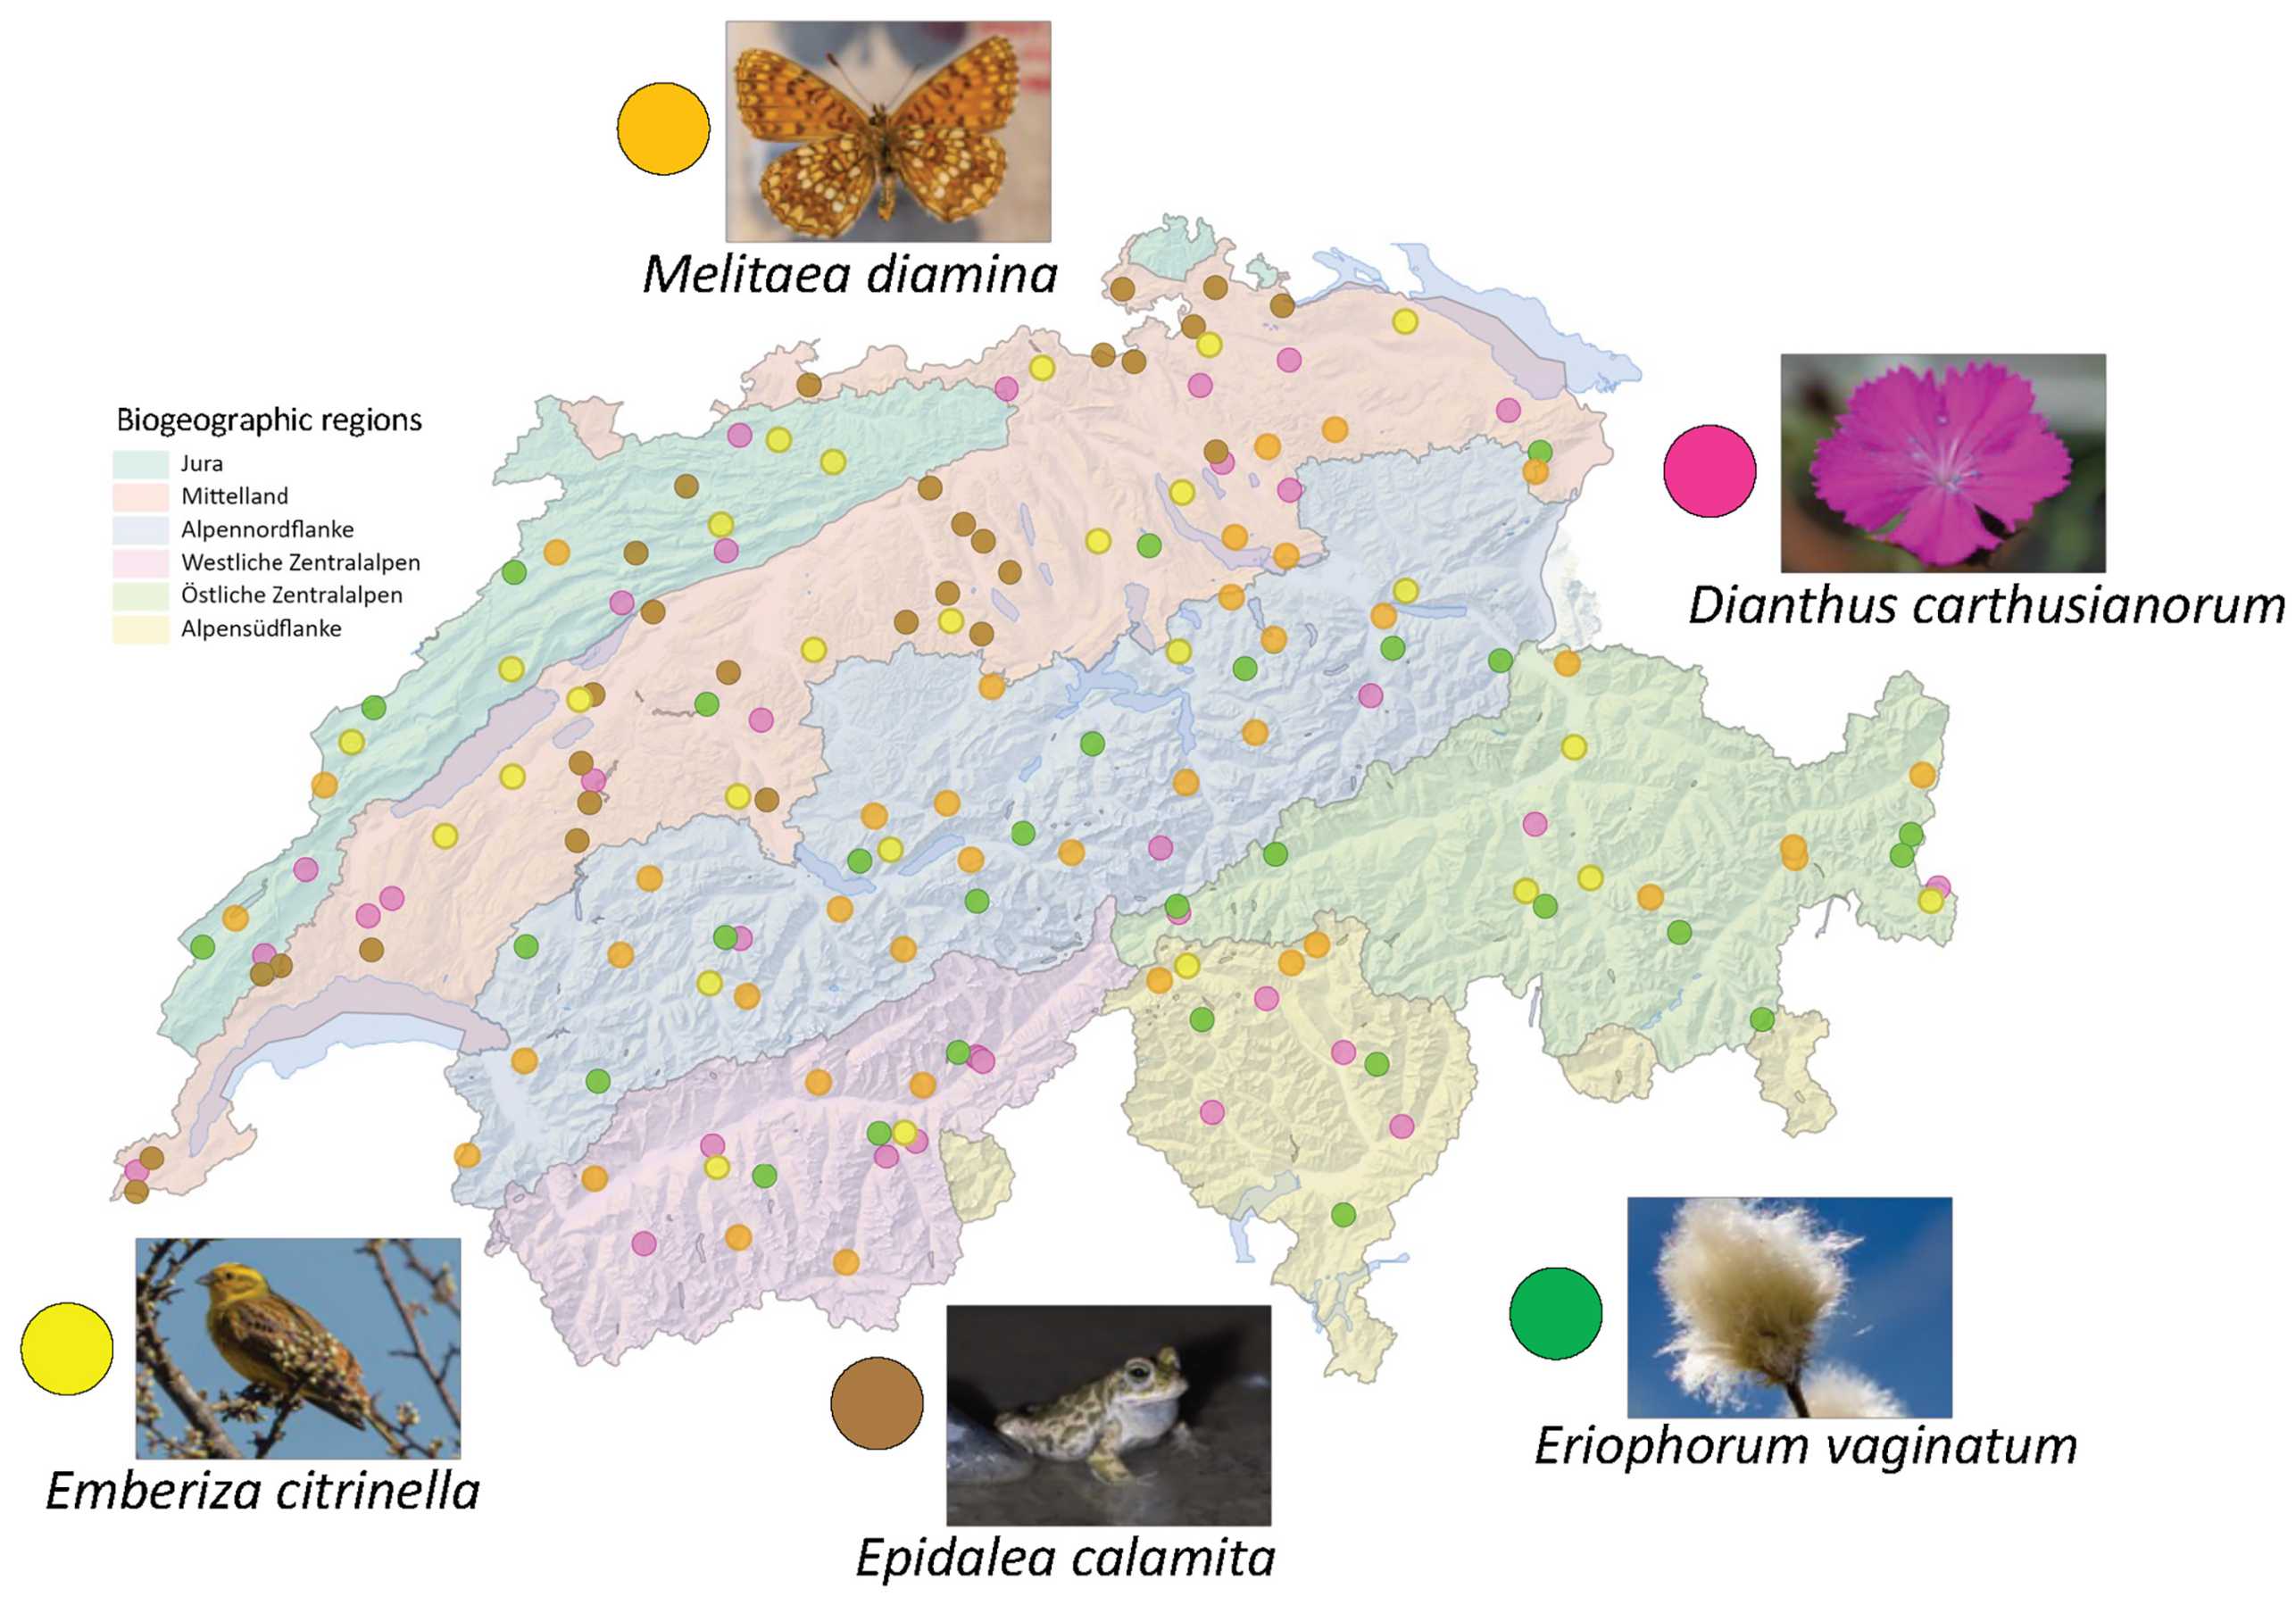 Enlarged view: Graphic, map of Switzerland, habitat of the different species entered.